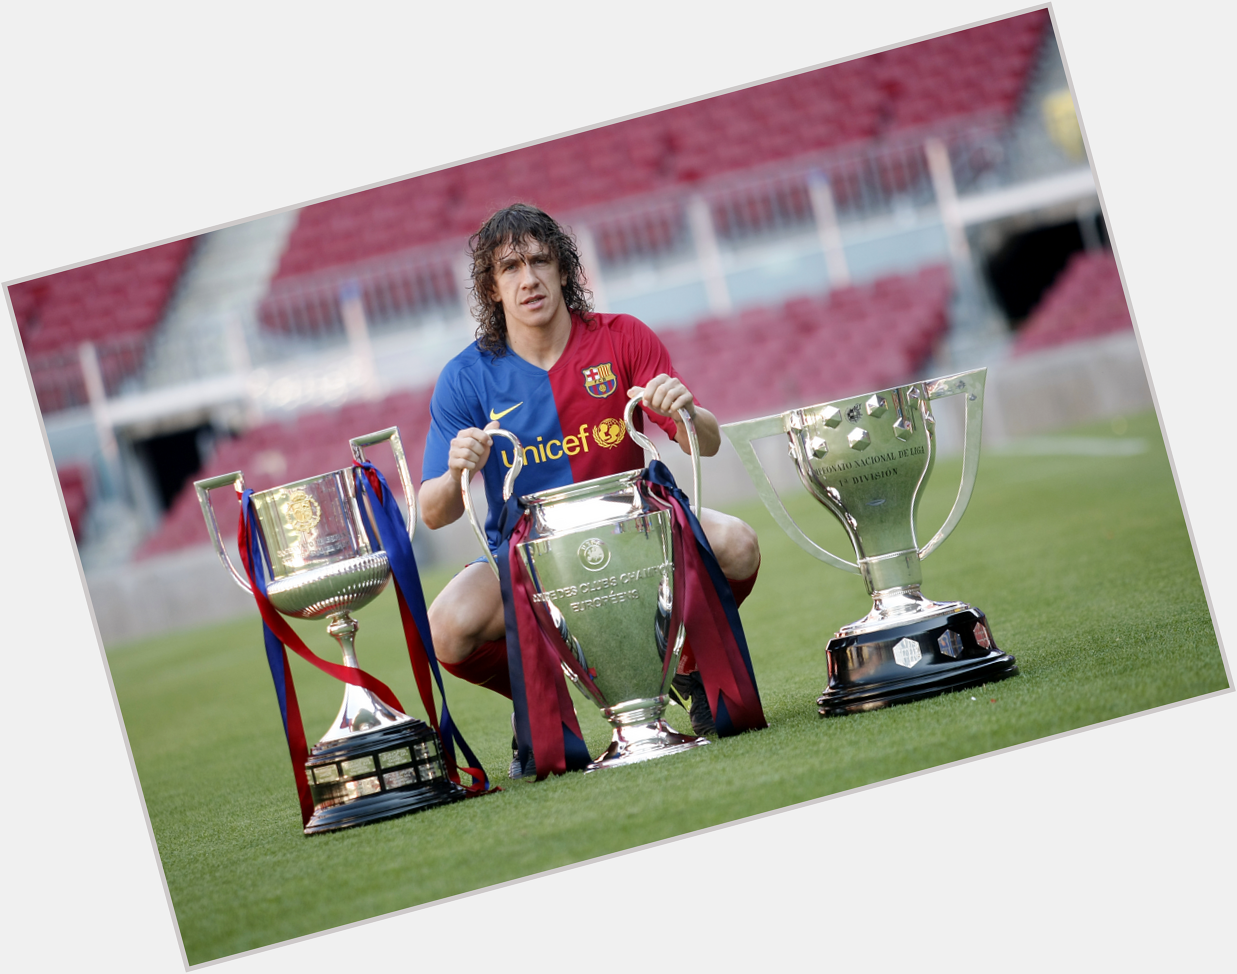 Happy birthday to Barcelona legend Carles Puyol! He made a huge 604 appearances for the first team before retiring. 